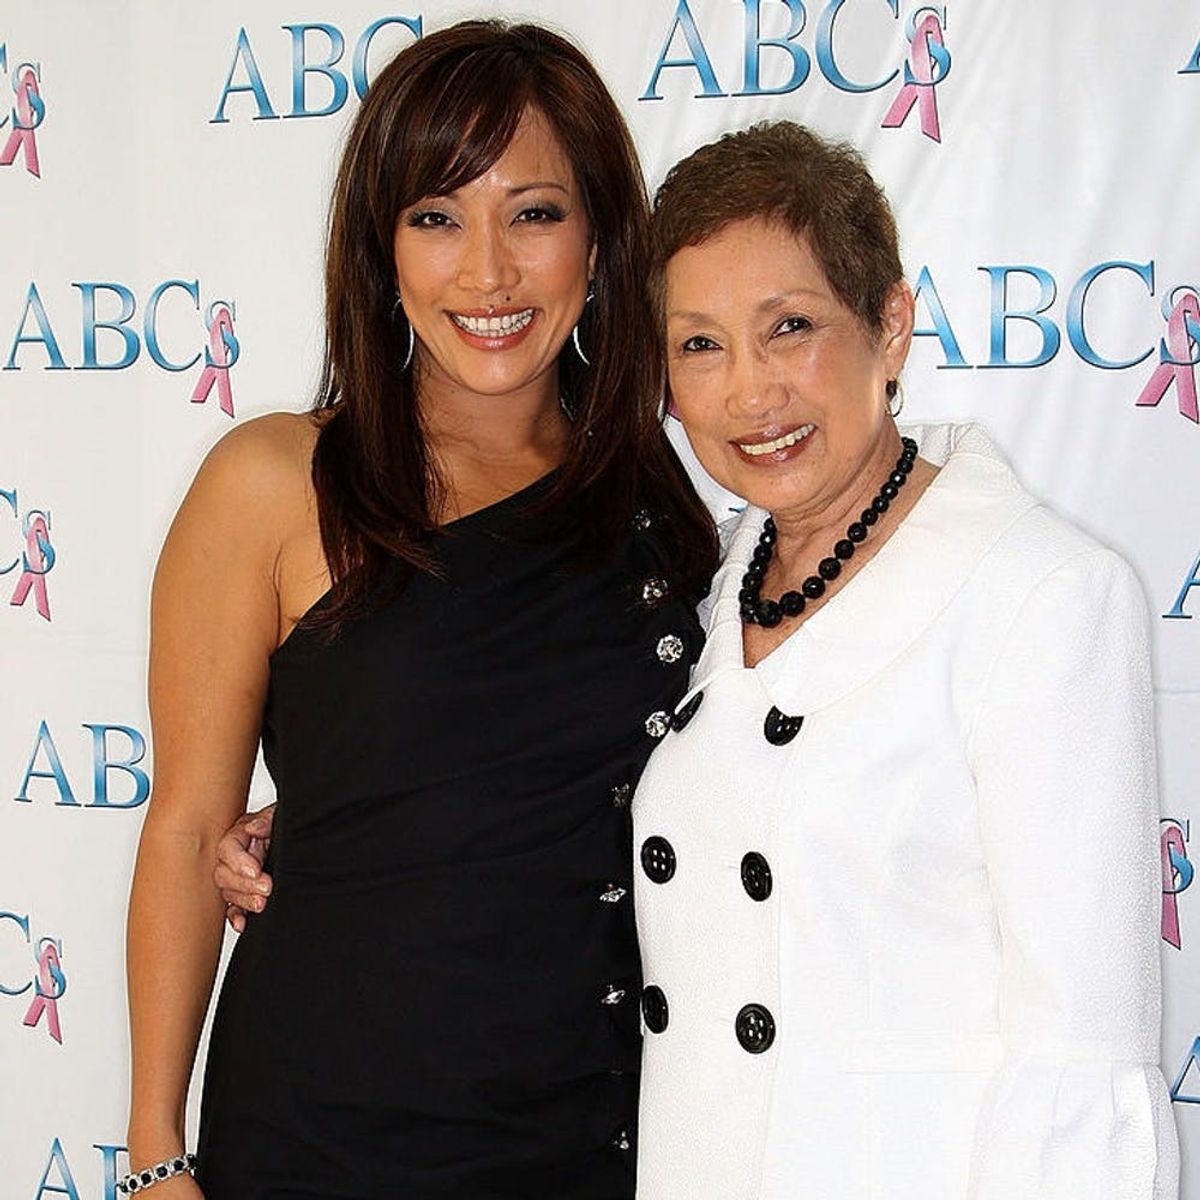 Carrie Ann Inaba Surprised Her Mom While Co-Hosting Live With Kelly and Ryan